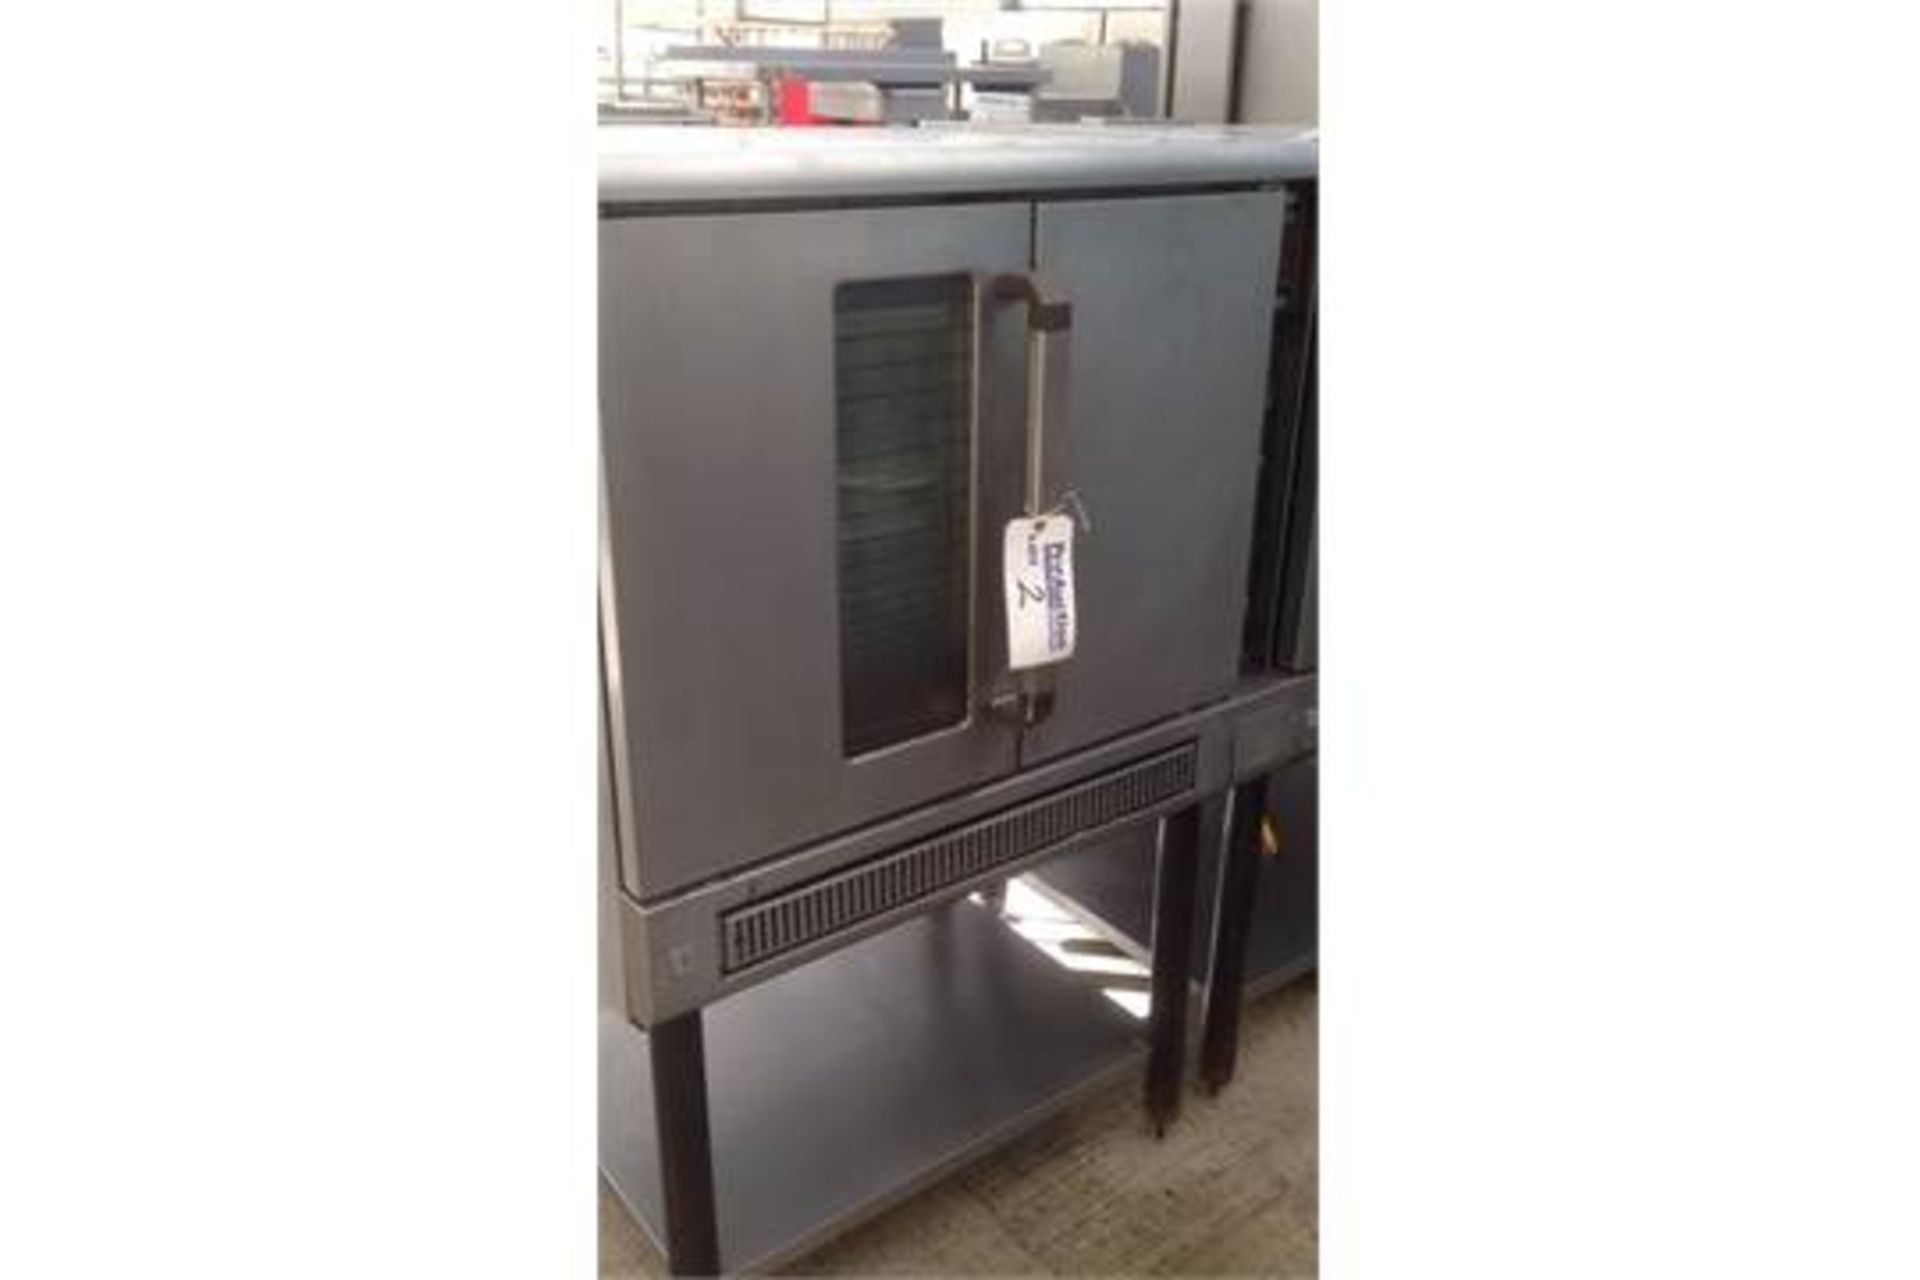 Falcon Model GS7008 gas oven from British manufacturer, Falcon is certainly worth viewing. Perfect